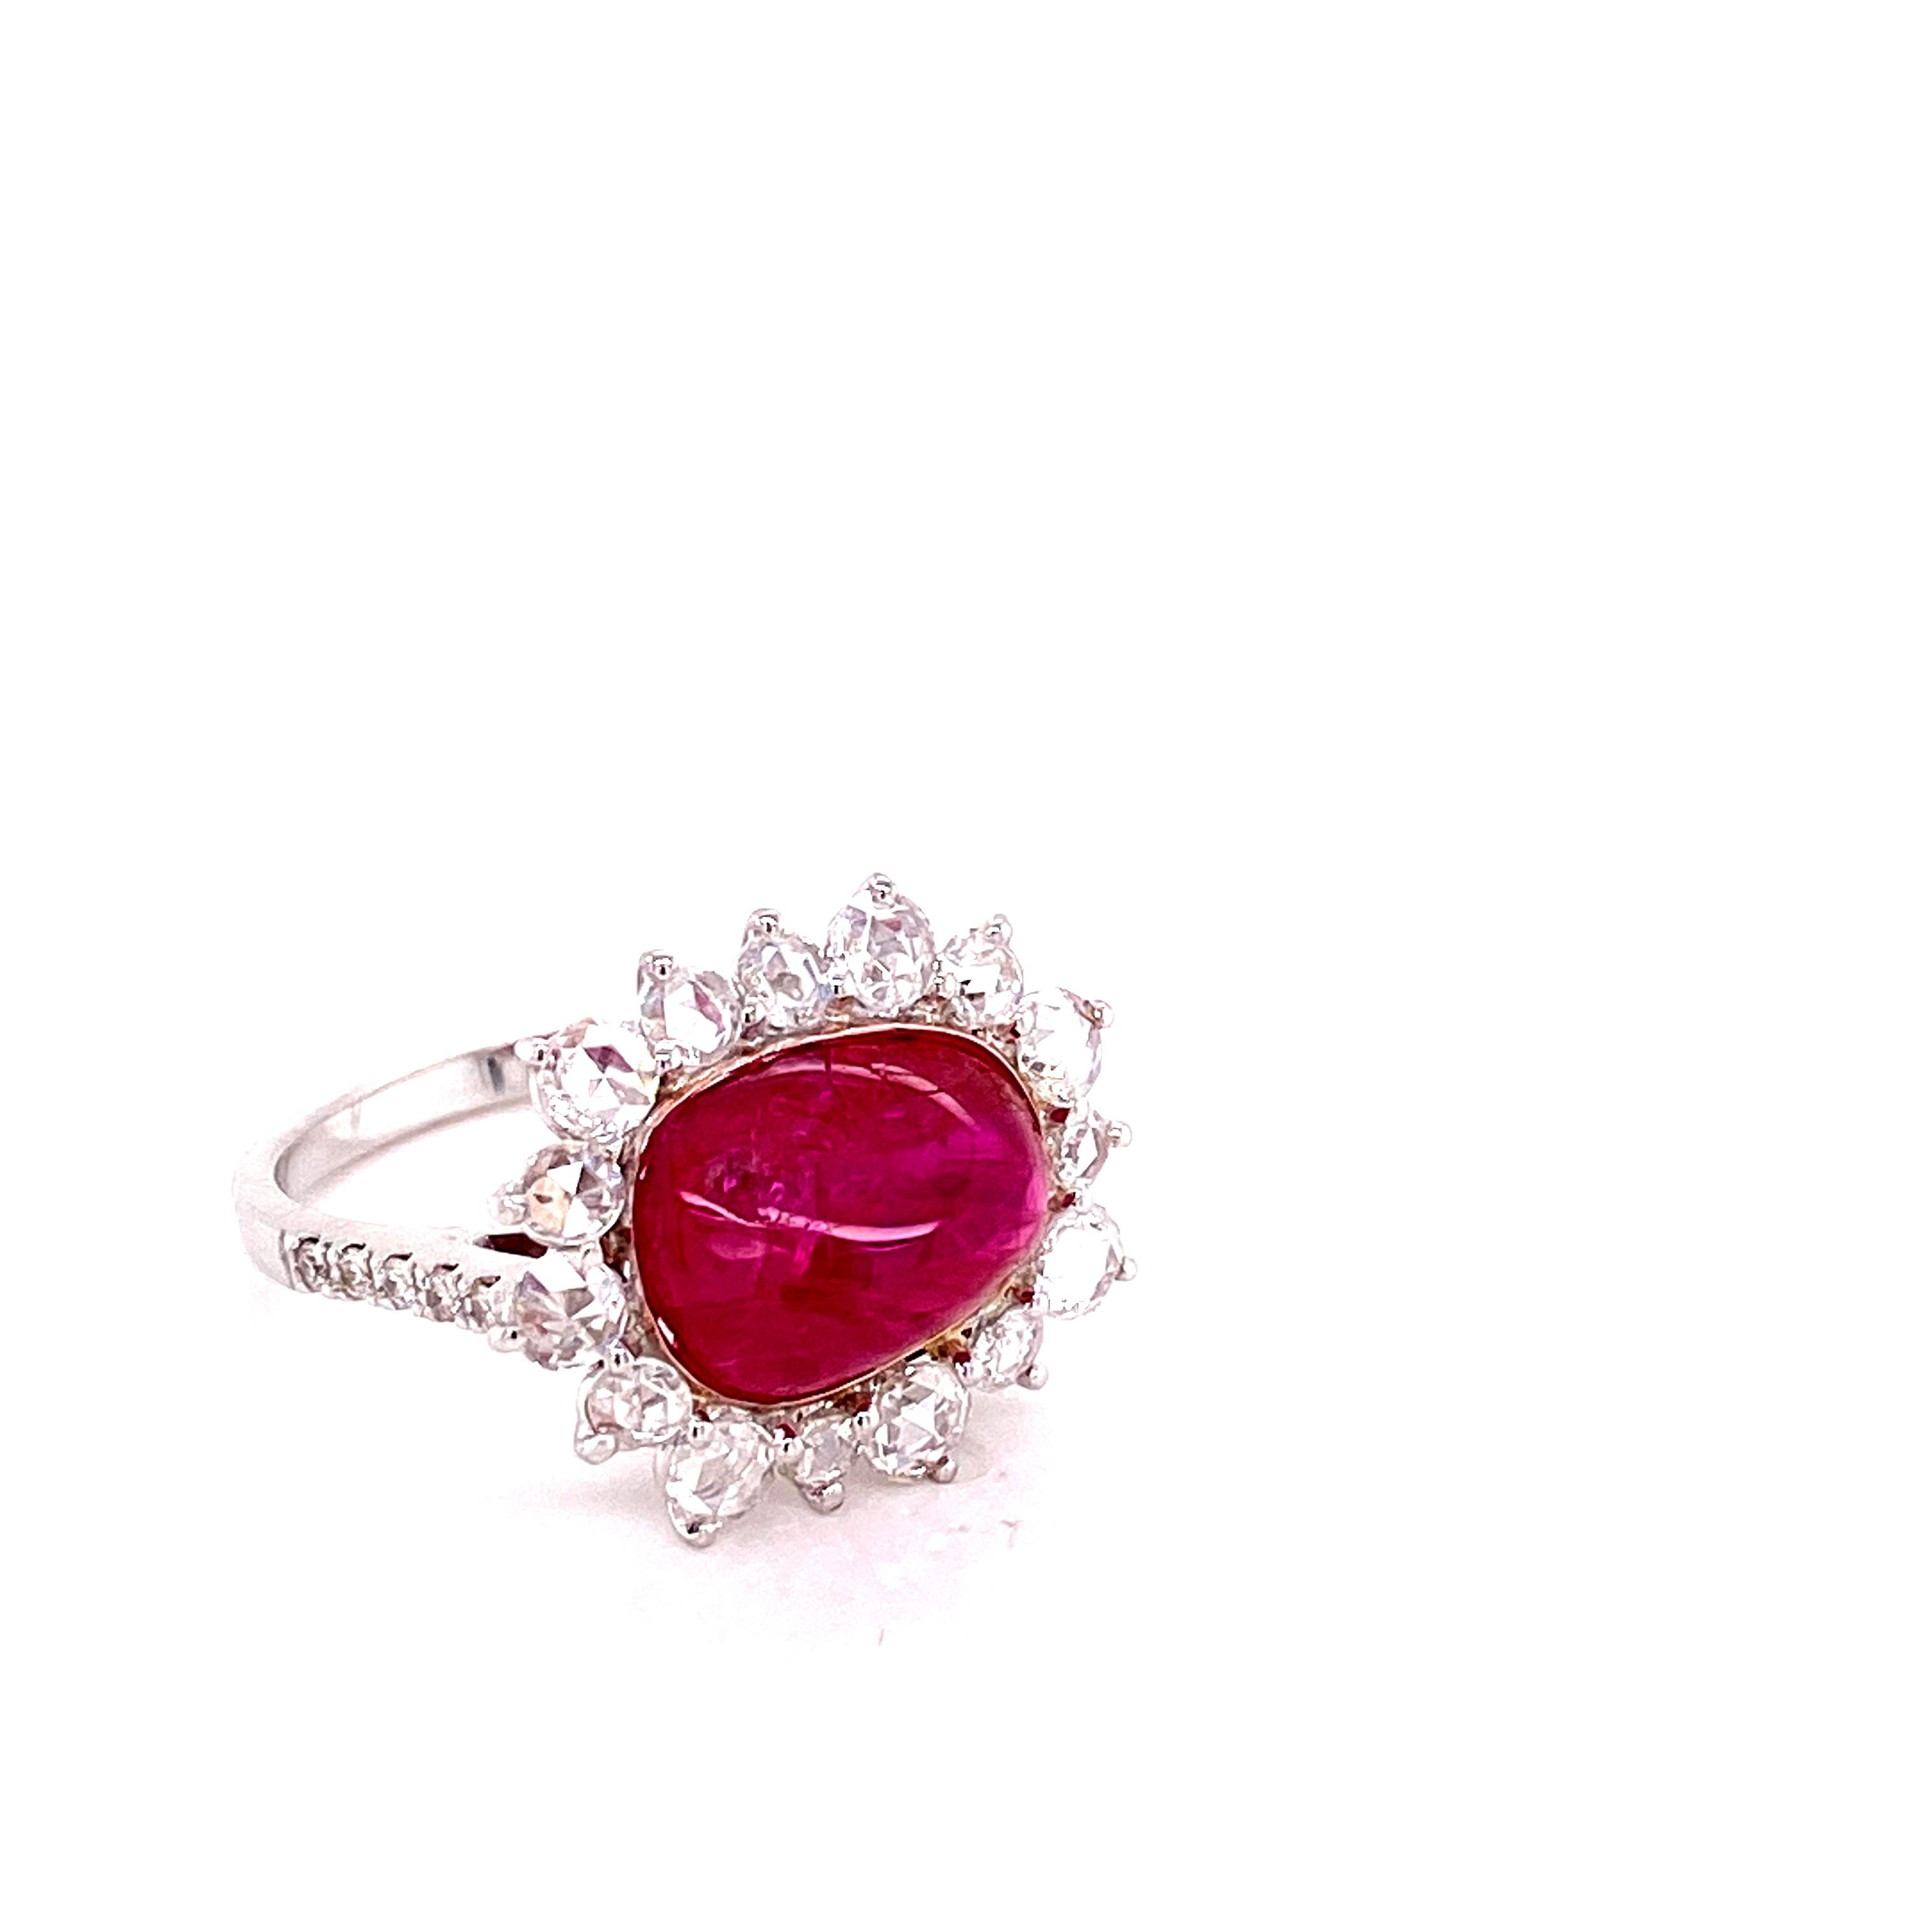 5.71 Carat GRS Certified Unheated Burmese Ruby and White Diamond Engagement Ring:

A beautiful and rare jewel, it features a gorgeous GRS certified unheated Burmese ruby cabochon weighing 5.71 carat, surrounded by white rose-cut diamonds weighing